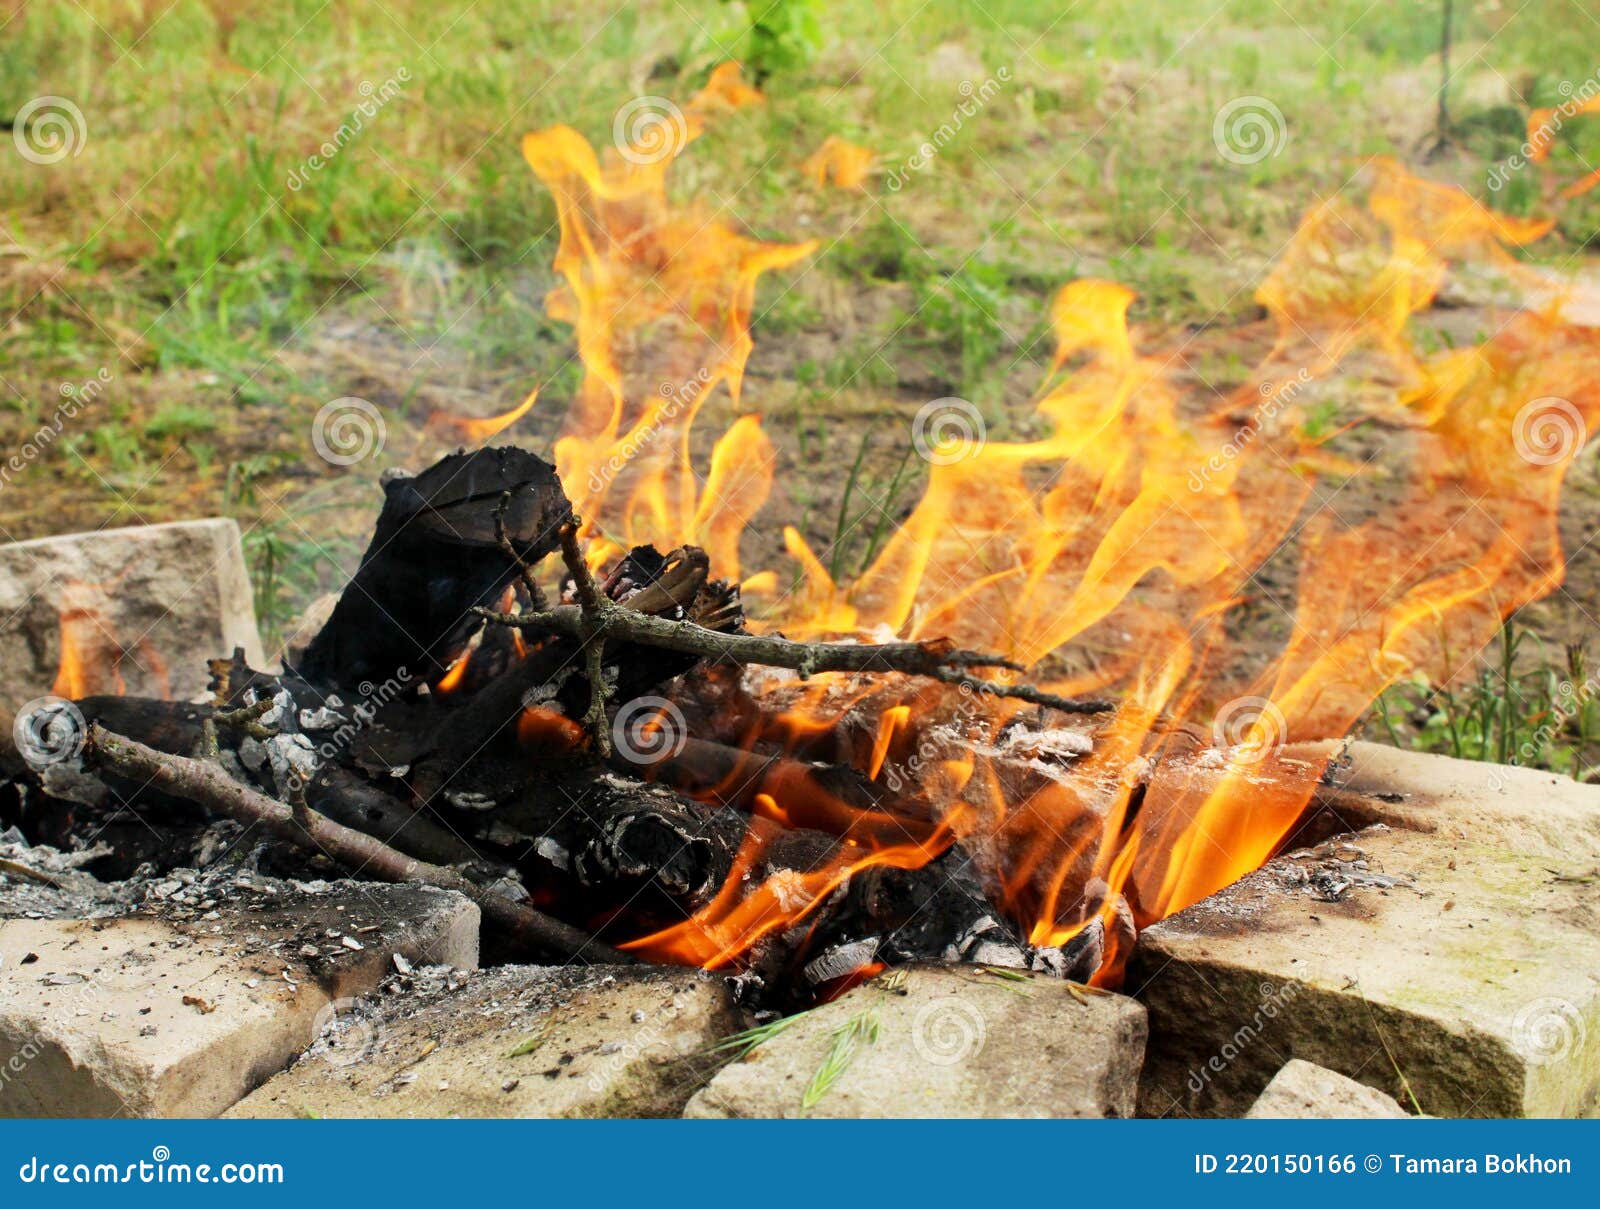 Close-up of a Homemade Stone Grill with Burning Wood. Make a Fire on ...